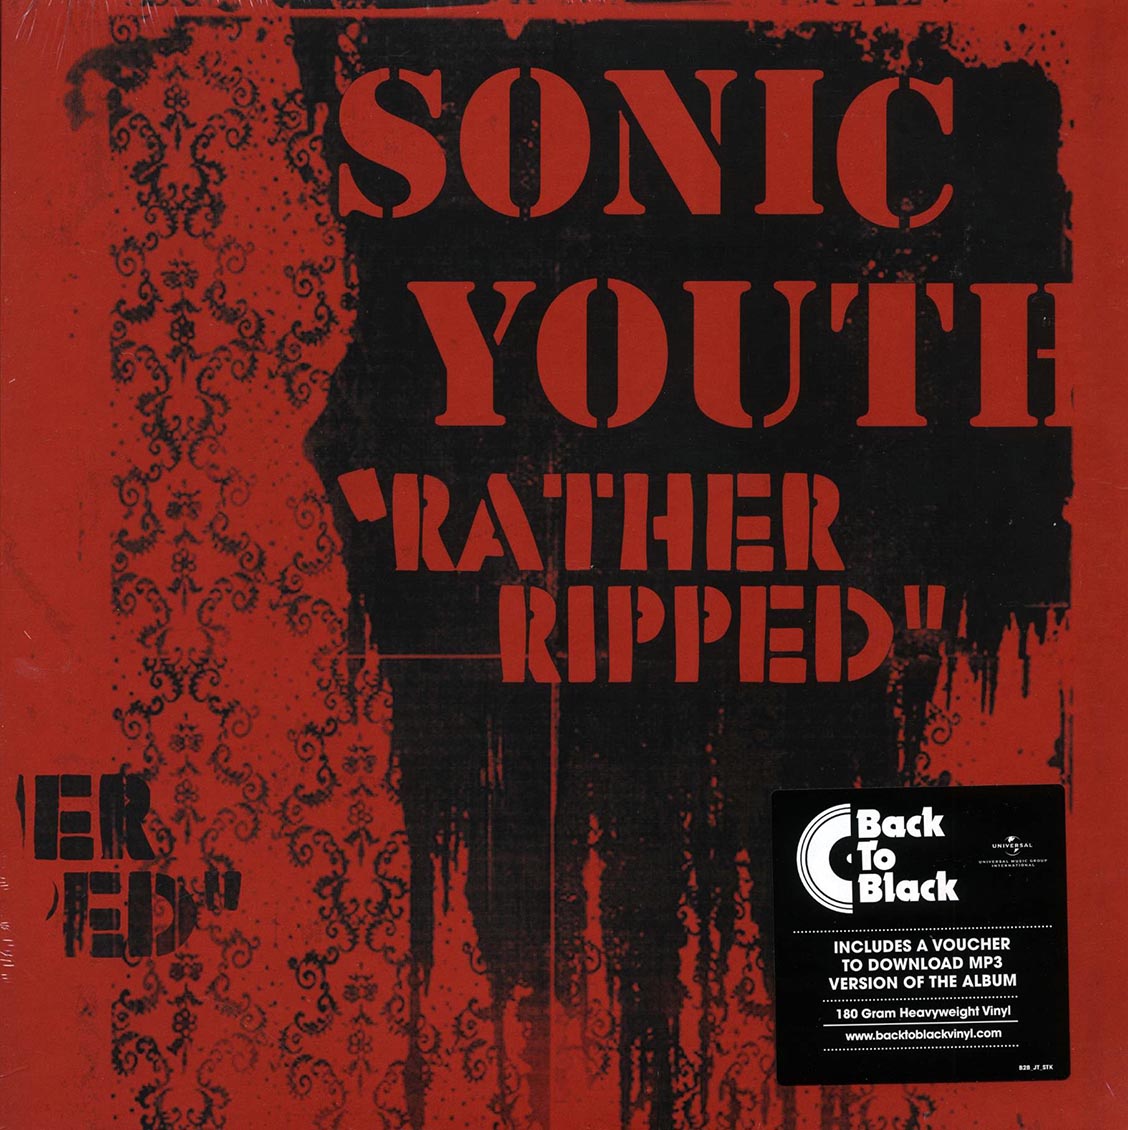 Sonic Youth - Rather Ripped (incl. mp3) - Vinyl LP